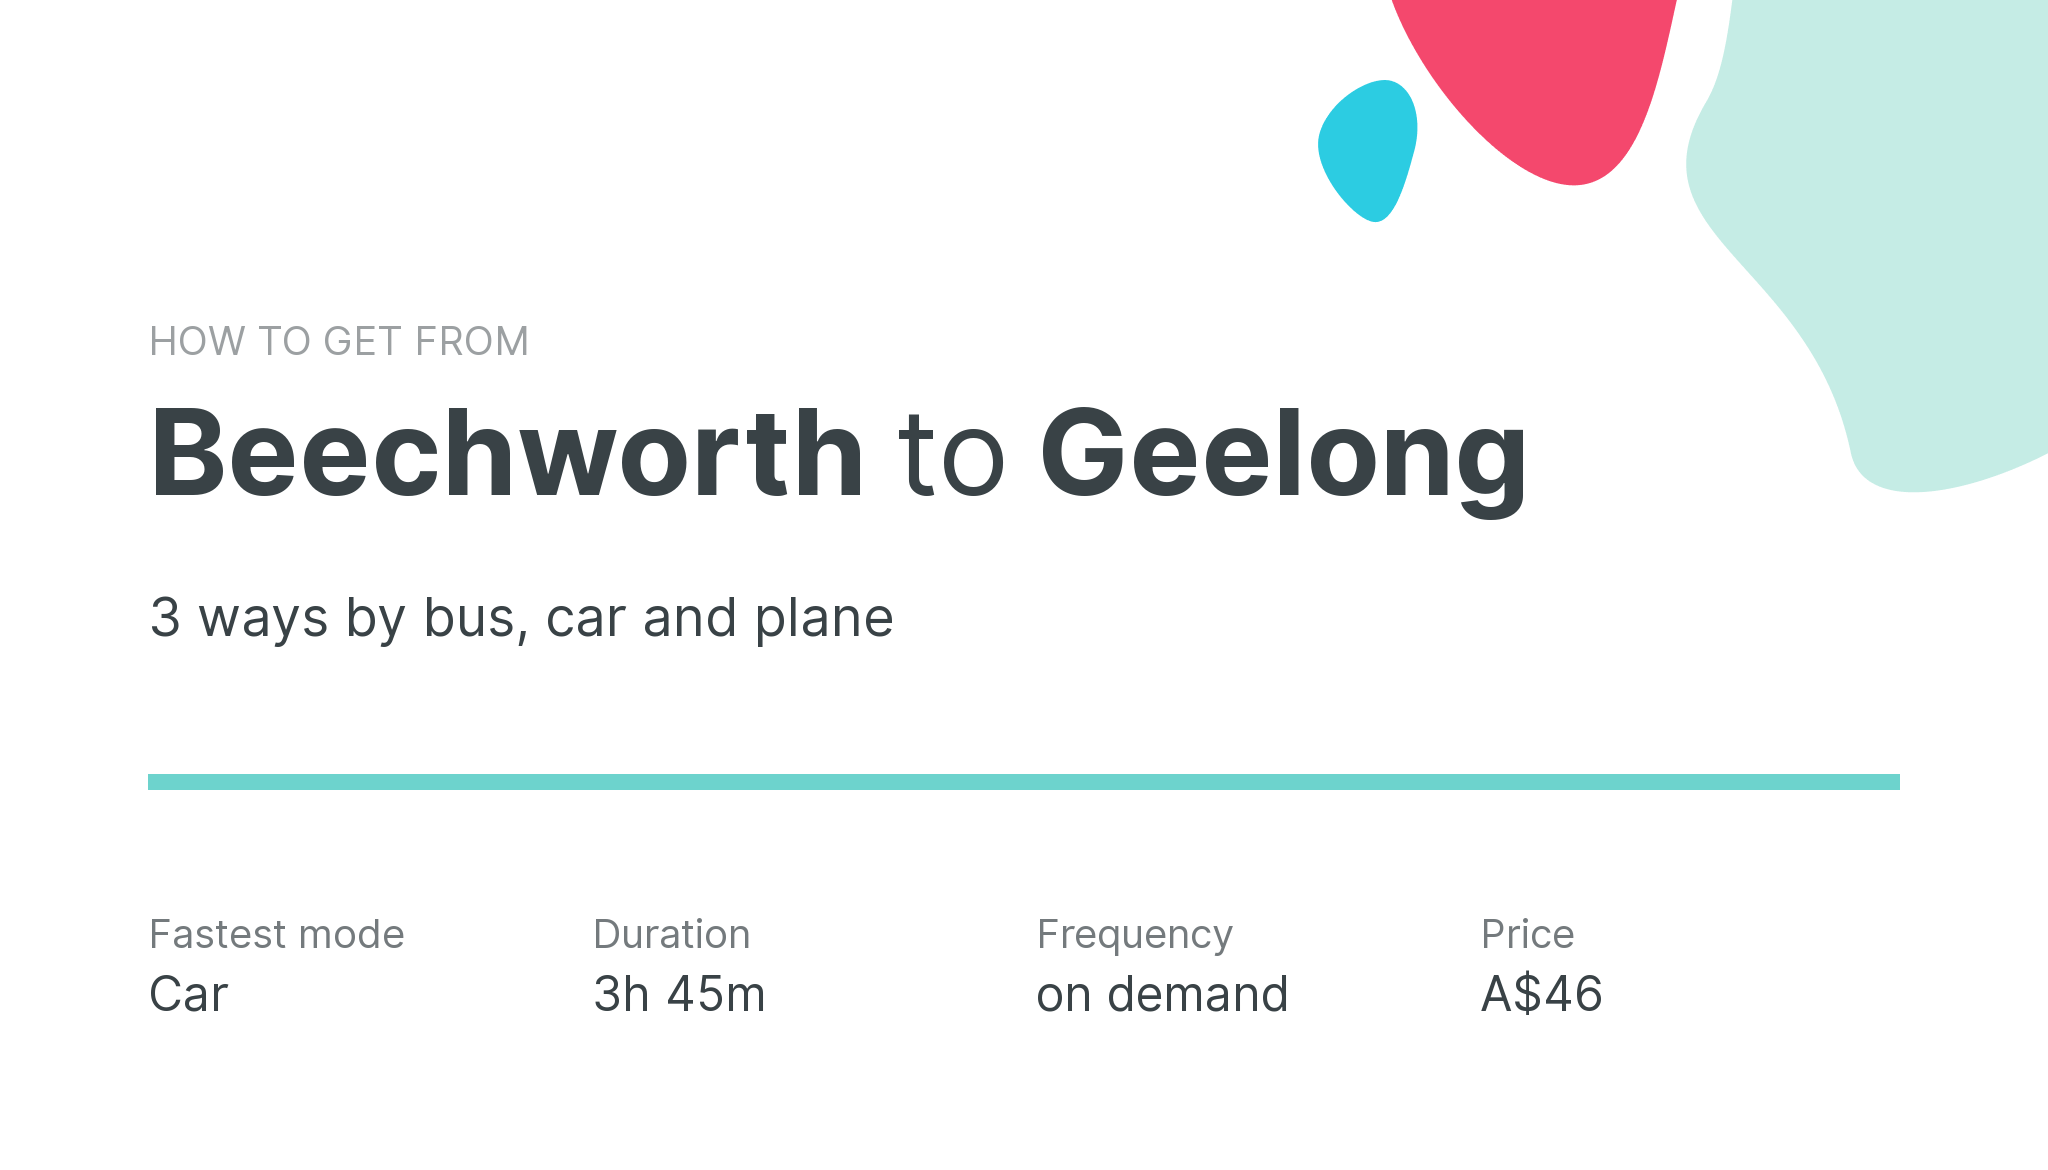 How do I get from Beechworth to Geelong